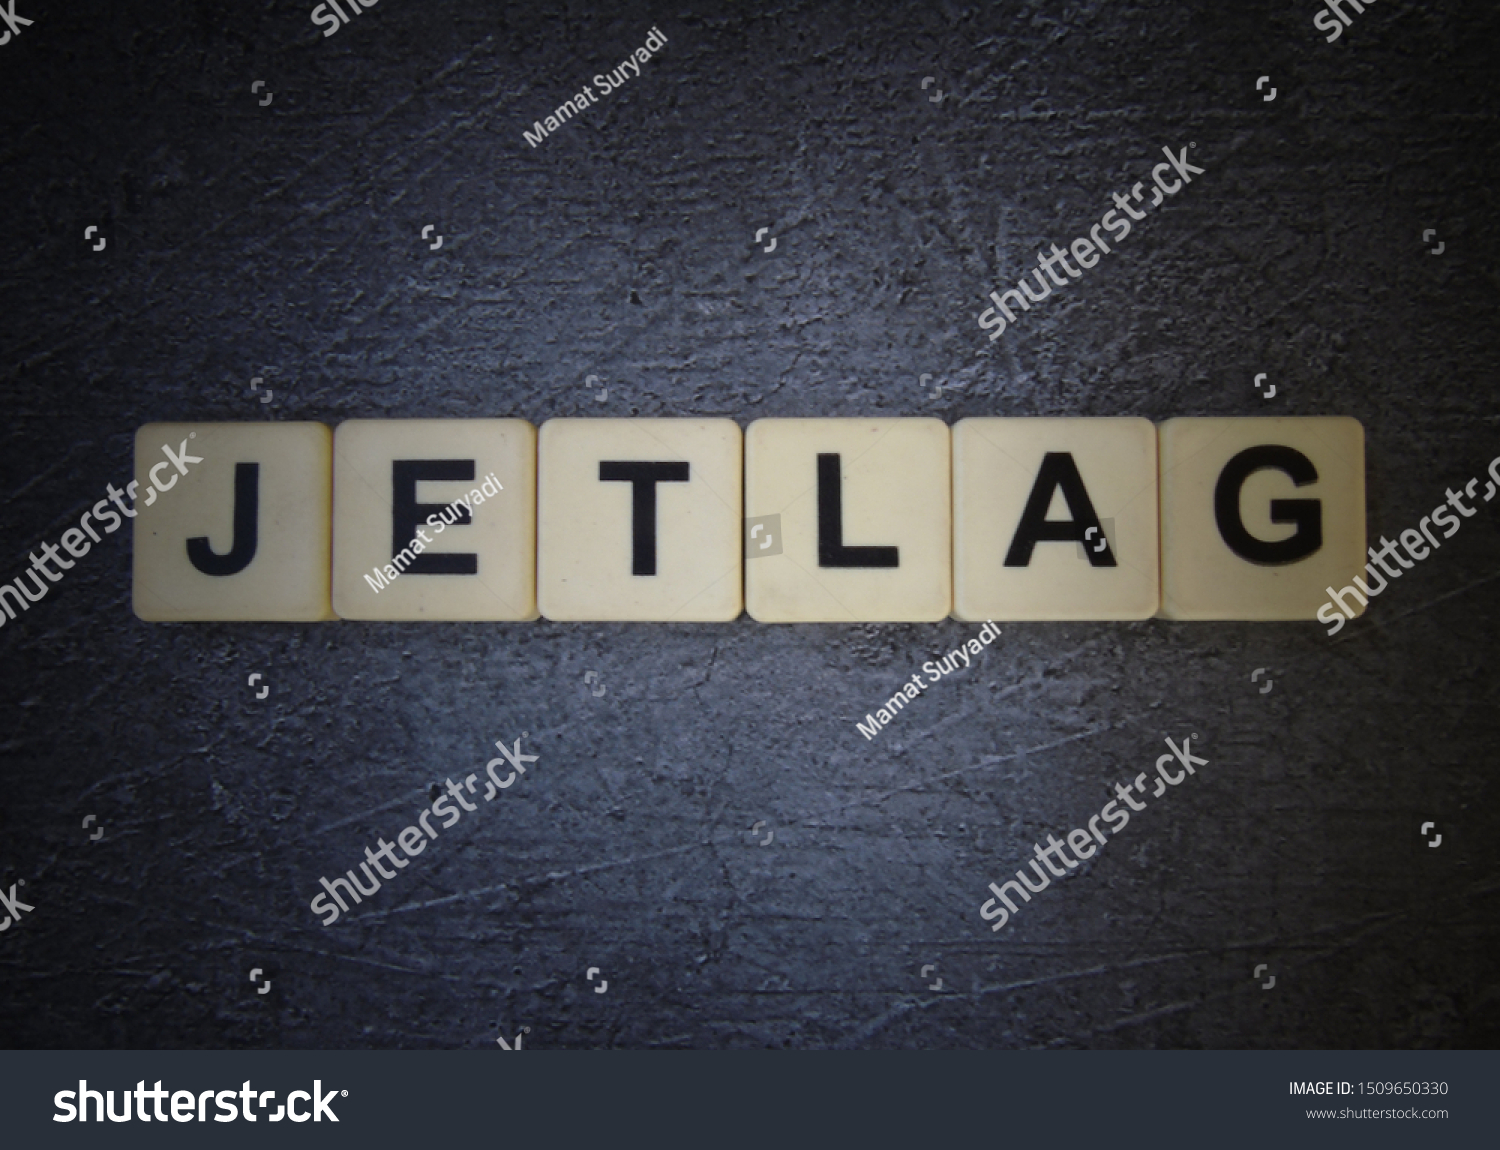 Jetlag, word cube with background #1509650330